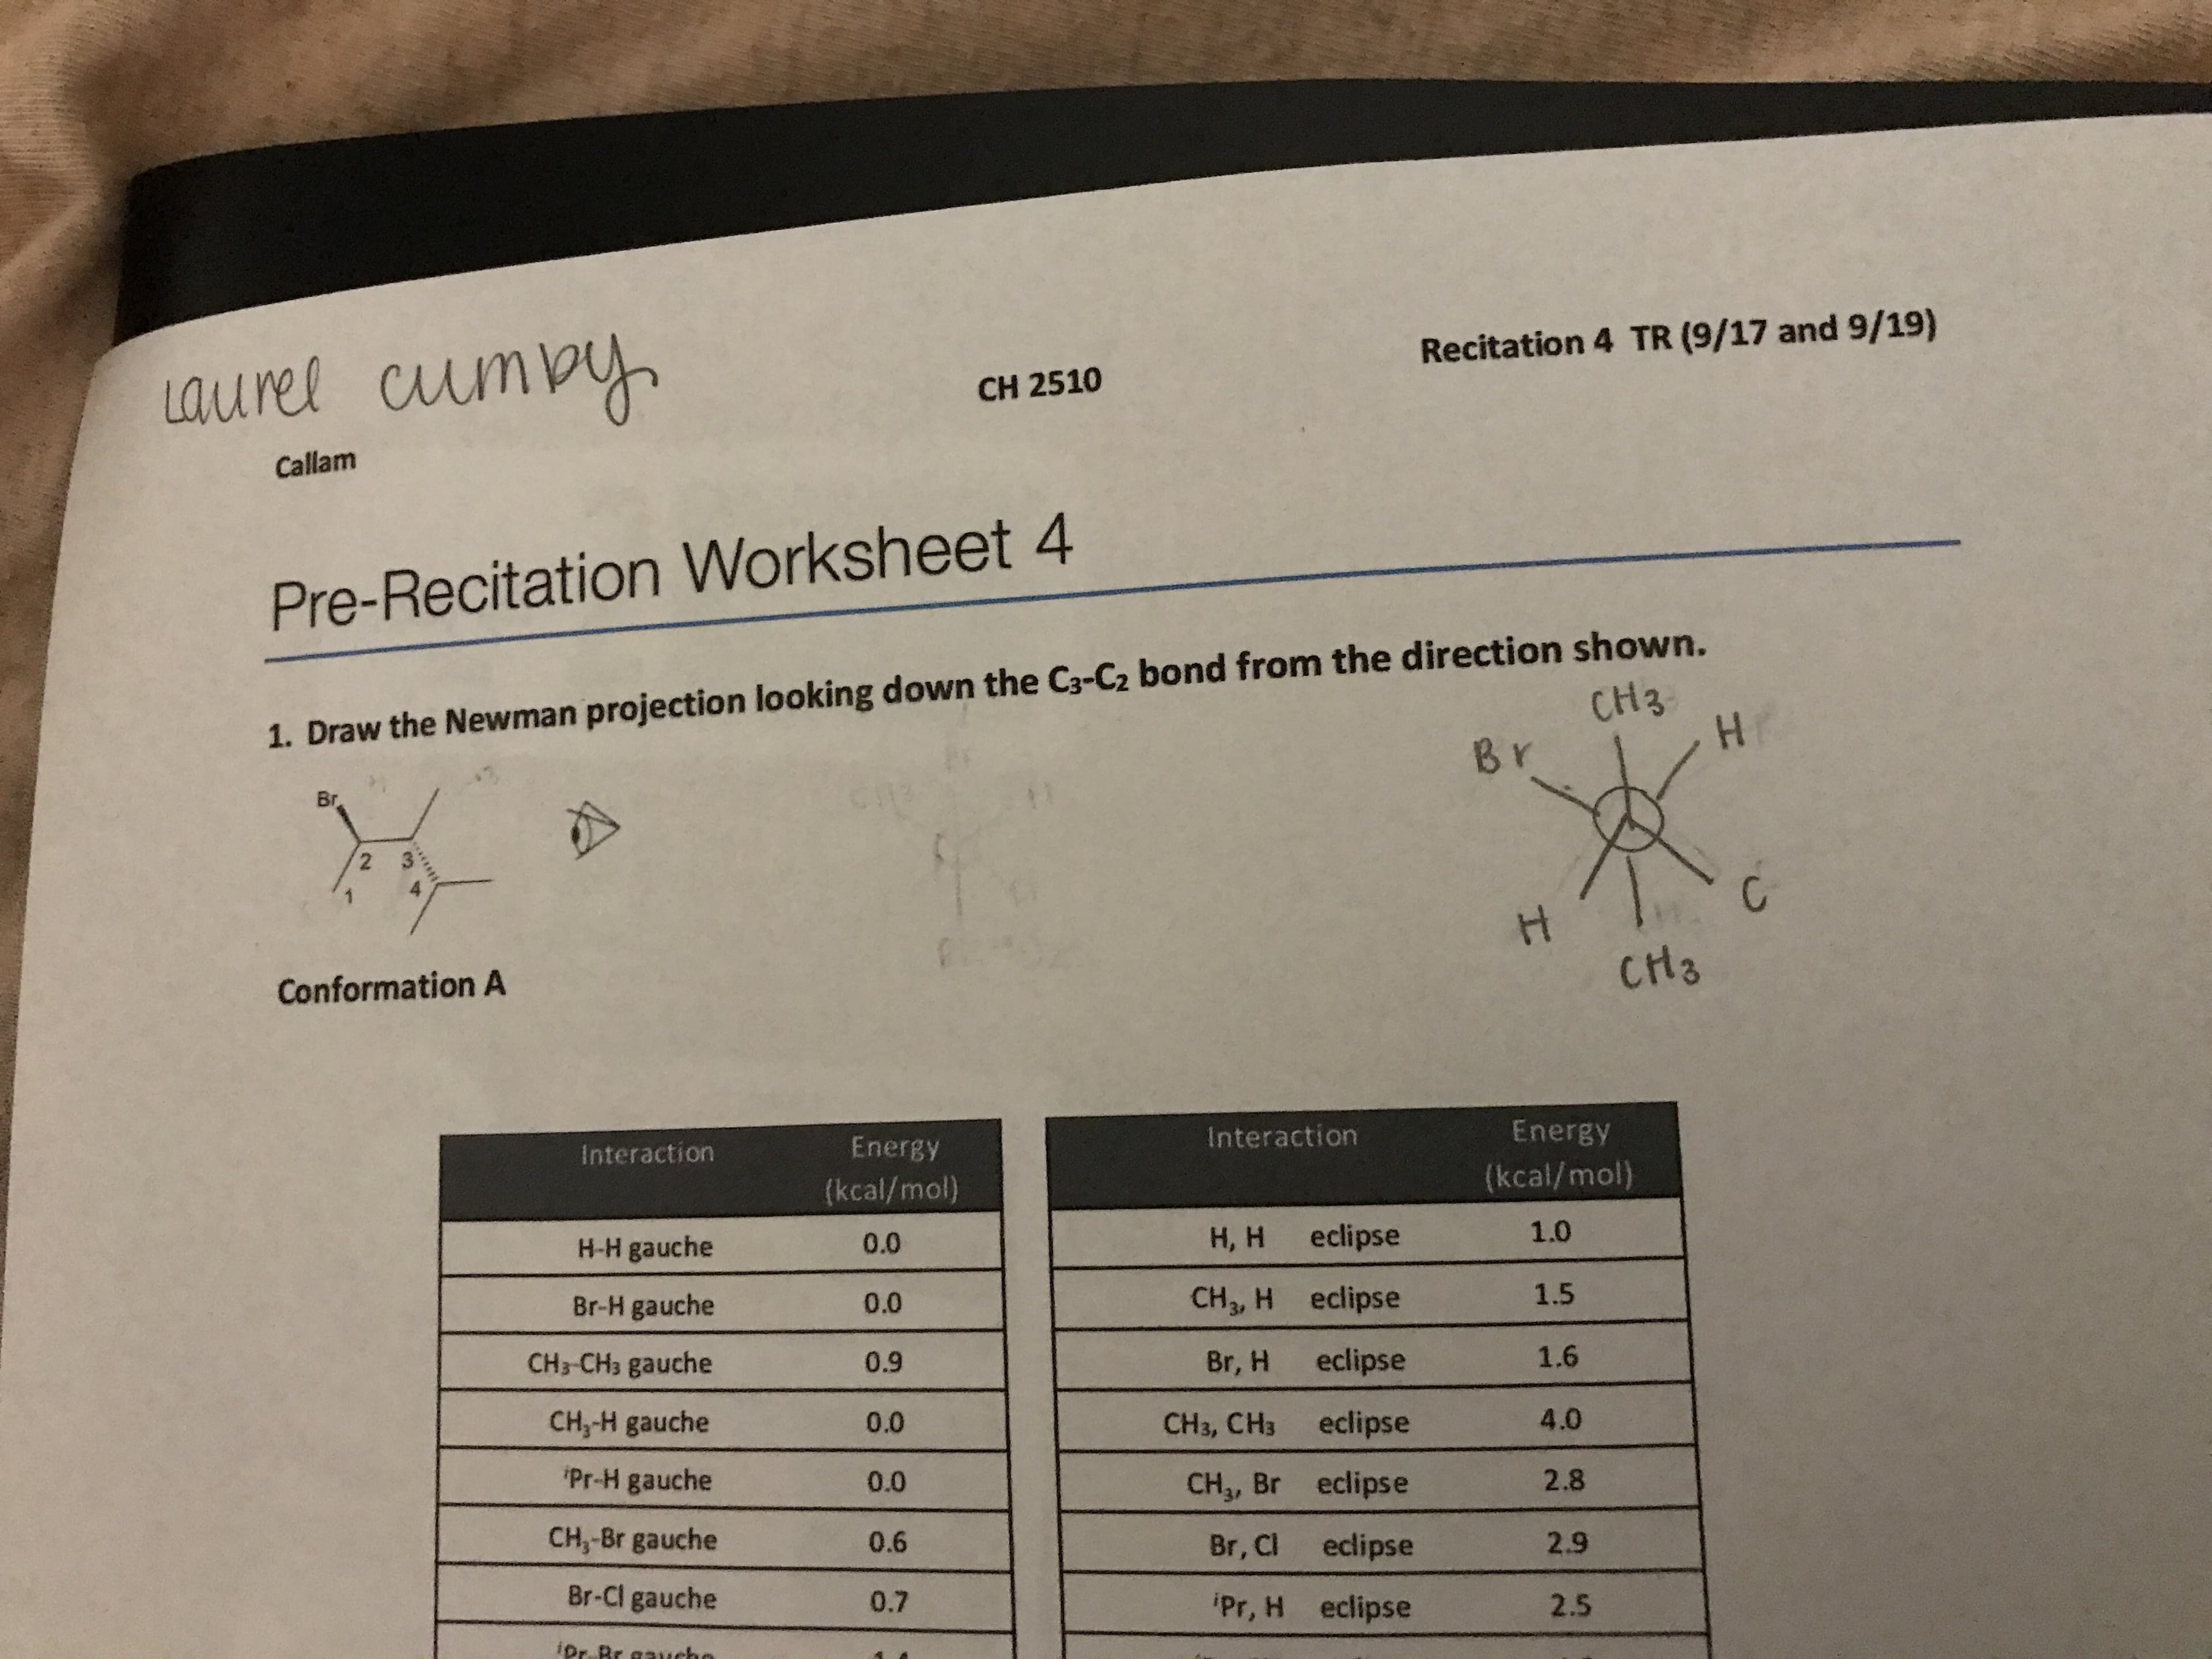 Recitation 4 TR (9/17 and 9/19)
aurel cumpy
CH 2510
Callam
Pre-Recitation Worksheet 4
1. Draw the Newman projection looking down the C3-Cz bond from the direction shown.
HH
CH3
Br
Br
2
CH3
Conformation A
Energy
Interaction
Energy
Interaction
(kcal/mol)
(kcal/mol)
1.0
Н, н
eclipse
0.0
H-H gauche
1.5
CH3, H eclipse
Br-H gauche
0.0
1.6
eclipse
CH3-CH3 gauche
Br, H
0.9
4.0
CH,-H gauche
eclipse
0.0
CH3, CH3
Pr-H gauche
2.8
0.0
CH3, Br eclipse
CH,-Br gauche
0.6
2.9
Br, Cl eclipse
Br-Cl gauche
0.7
Pr, H eclipse
2.5
iDr Br aaueho
I
